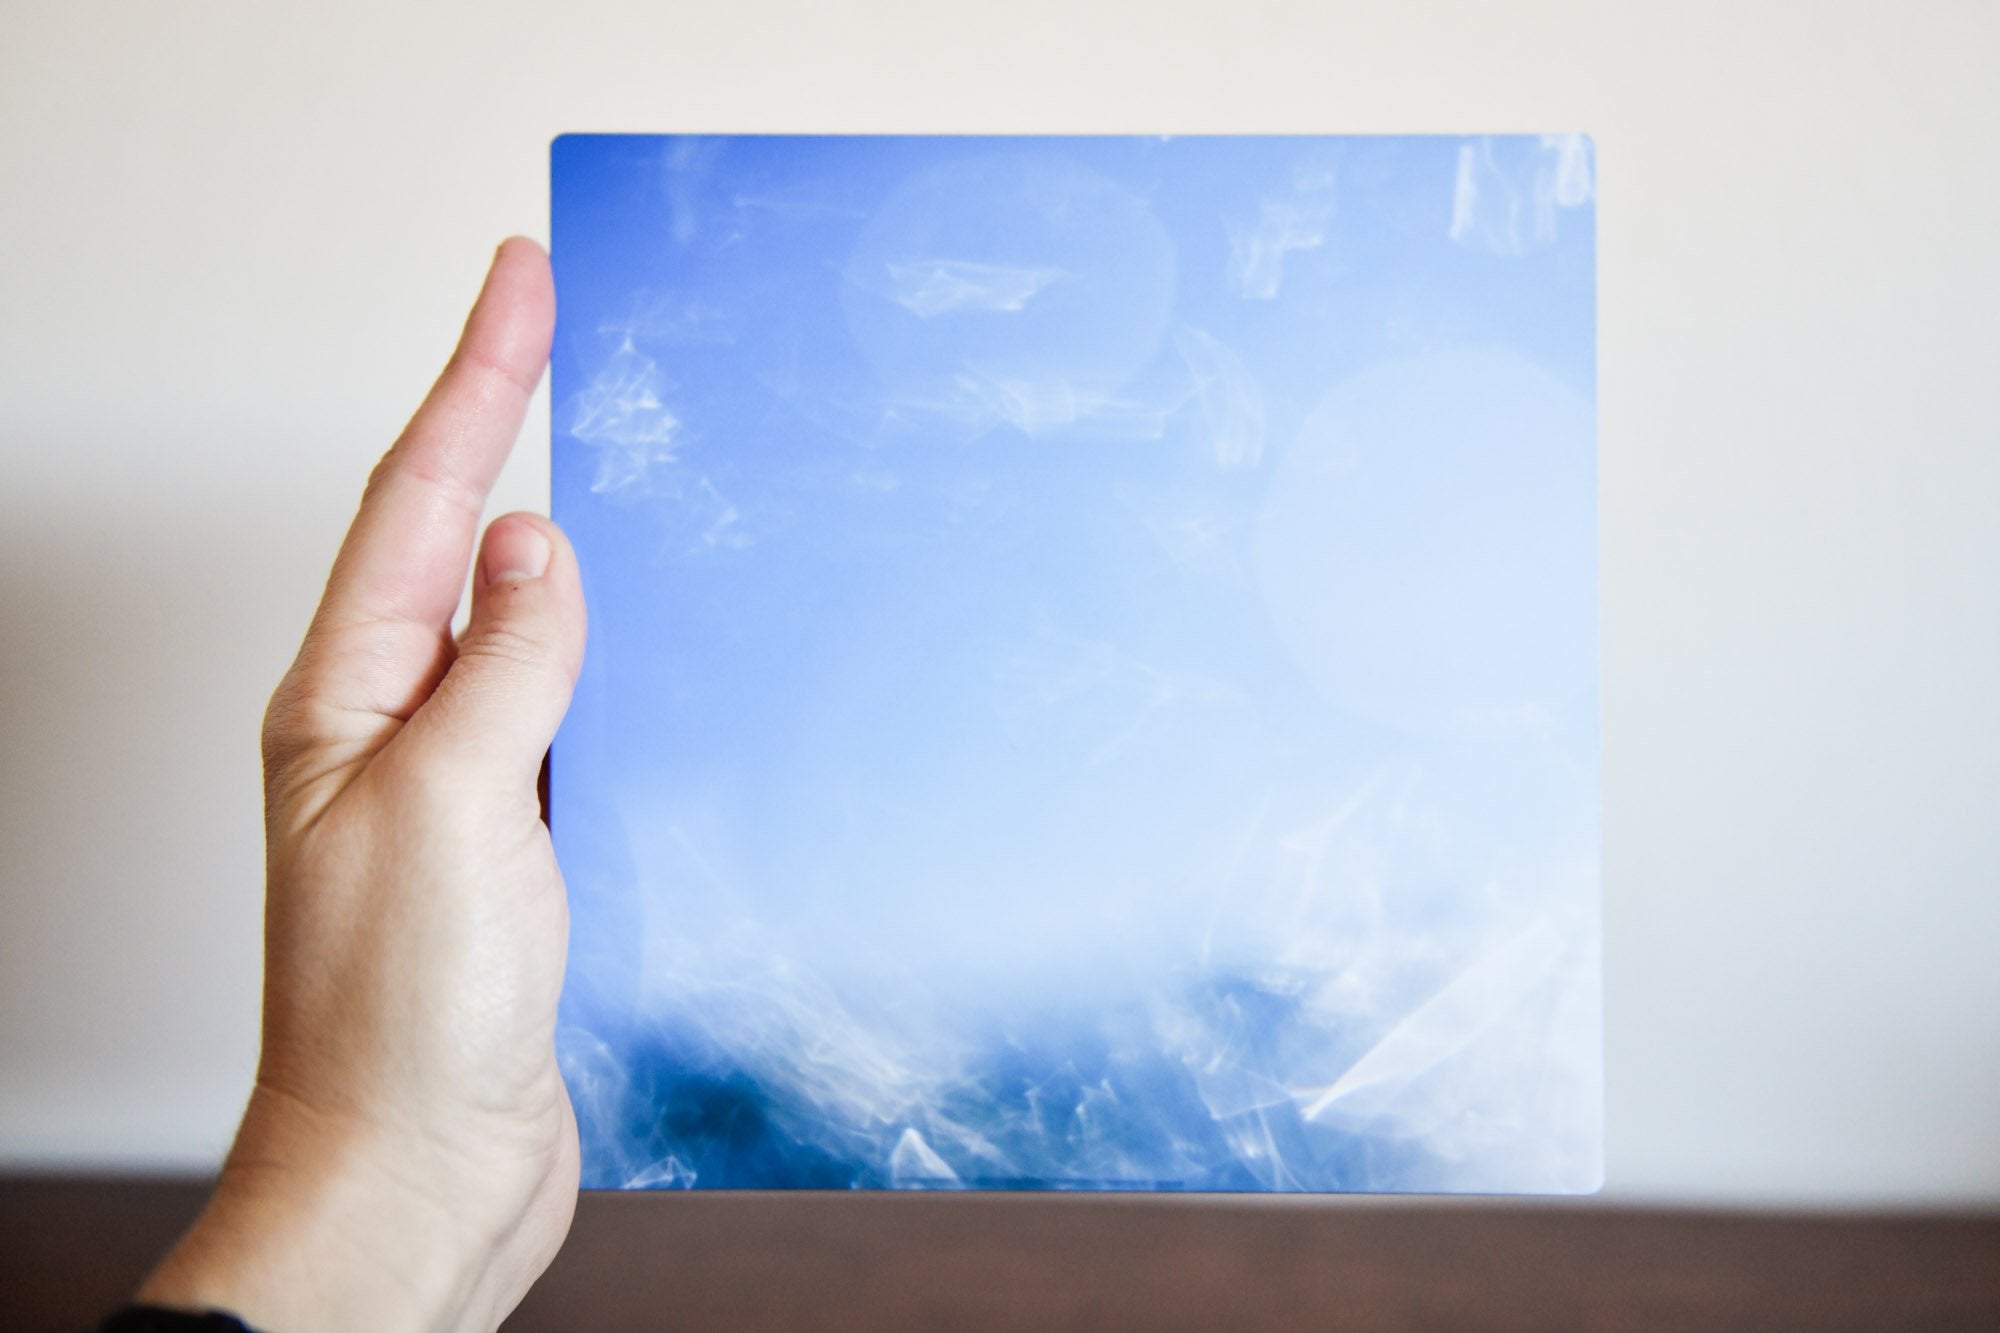 Cate Brown Photo Bokeh Blue #2 // Metal Print 7x7" // Limited Edition 1 of 150 Available Inventory Ocean Fine Art